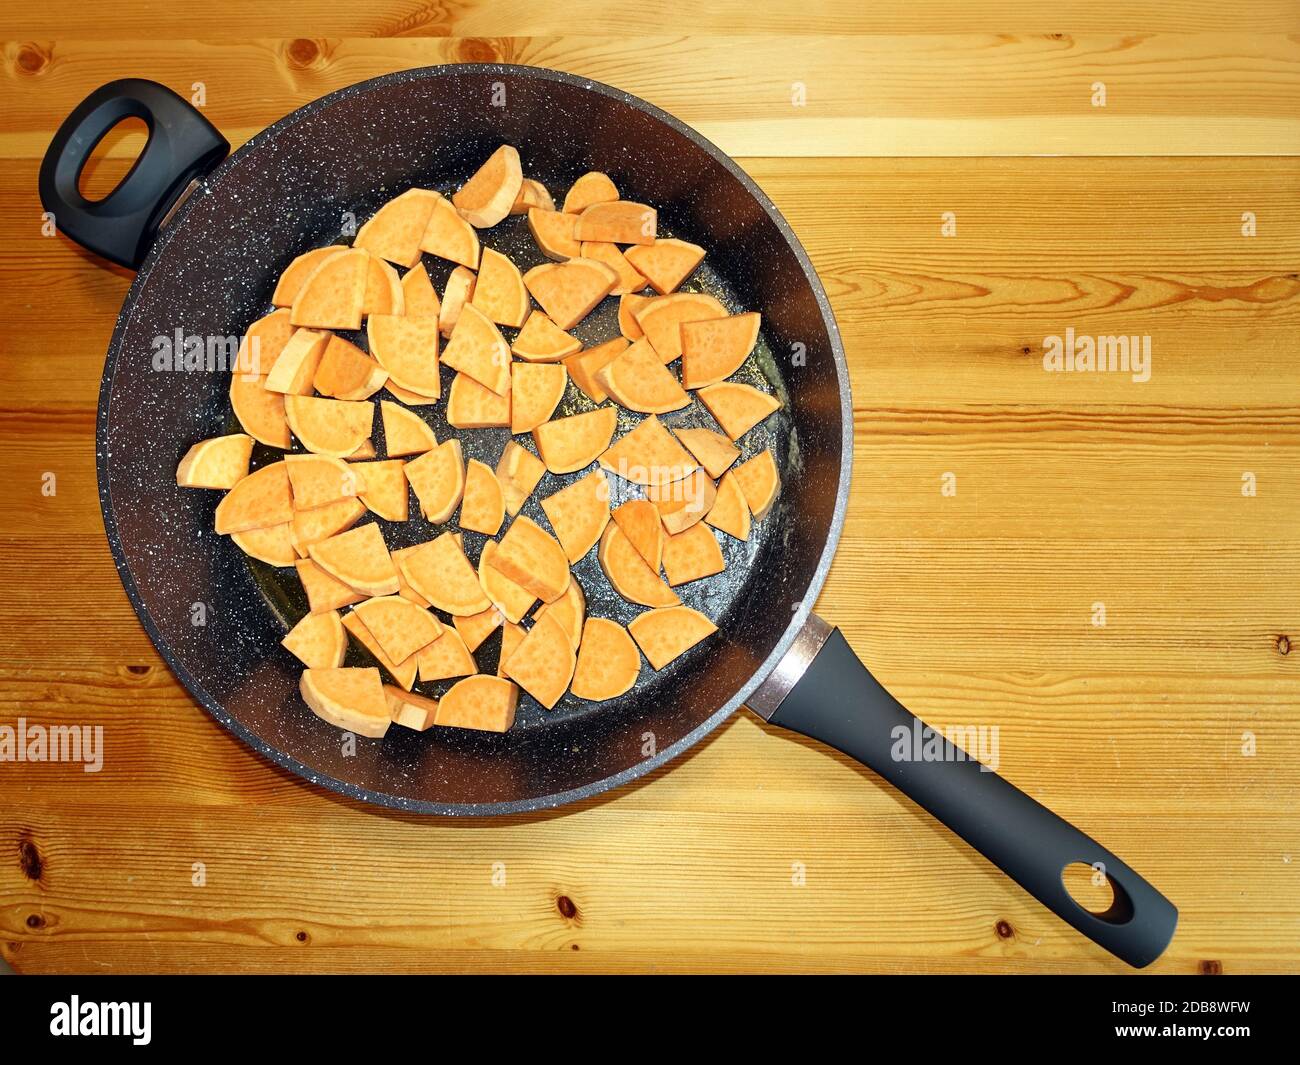 Bratpfanne High Resolution Stock Photography and Images - Alamy